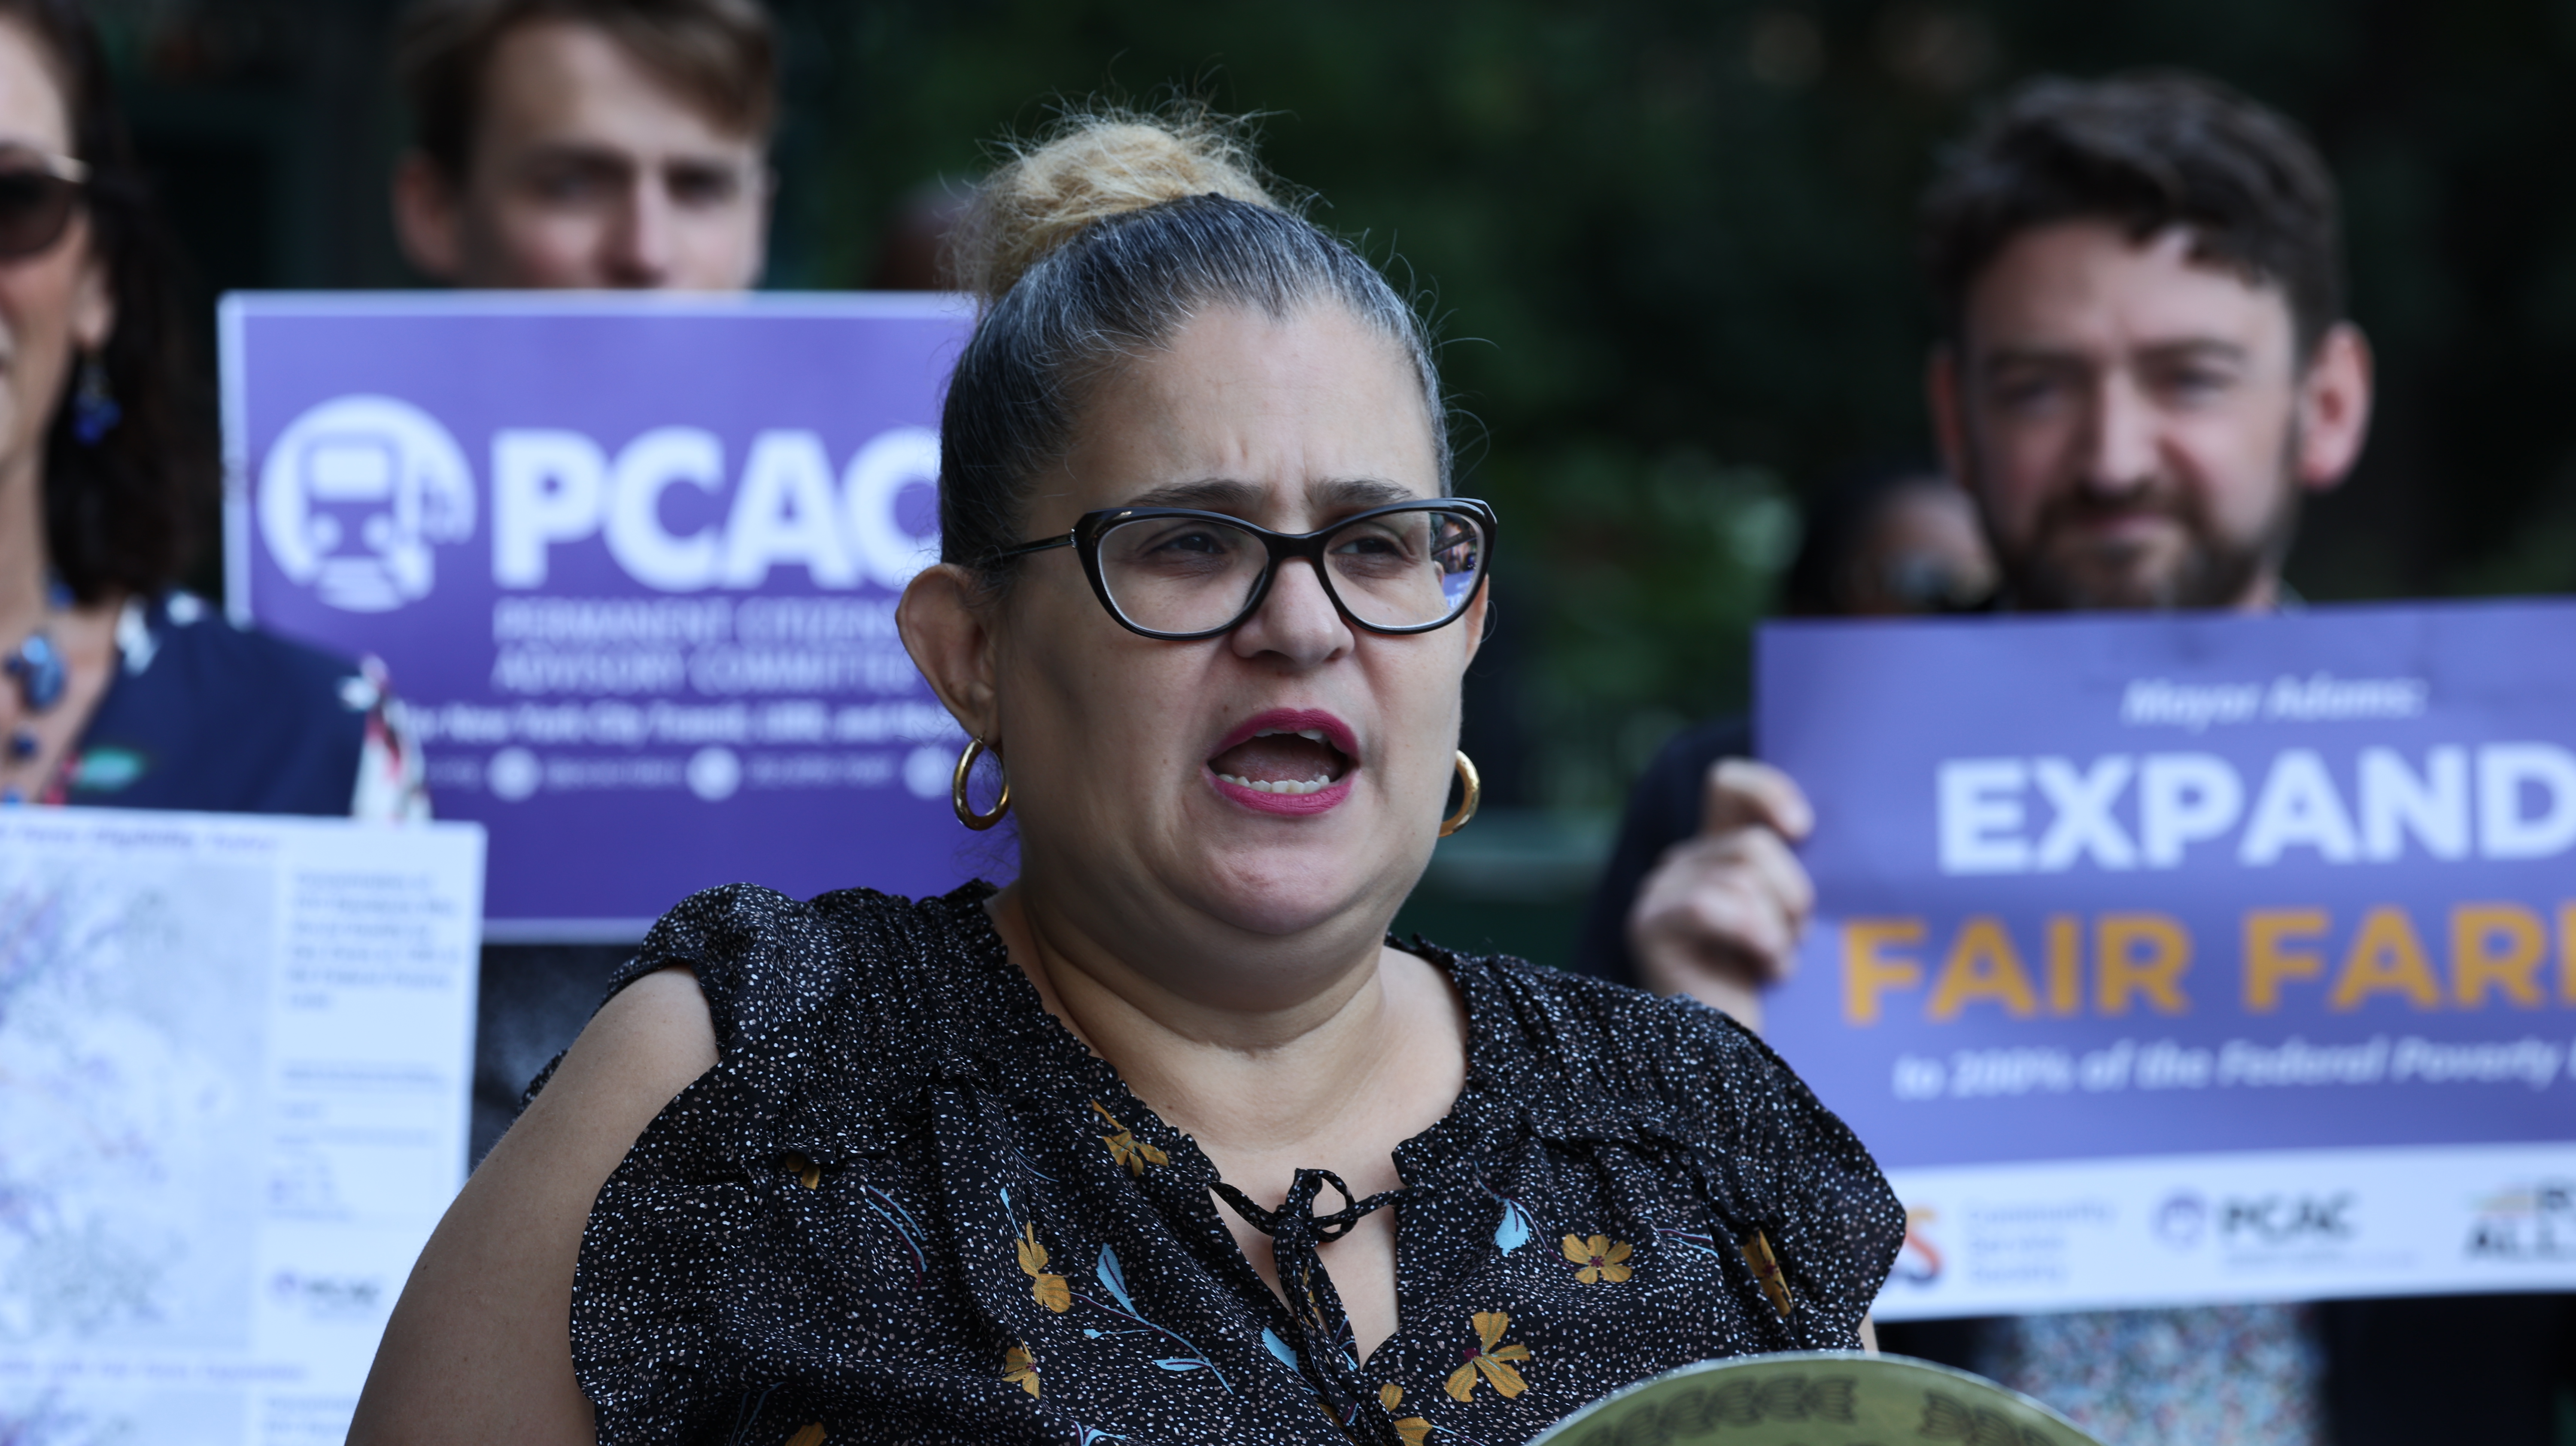 New York City Council member Diana Ayala is pictured at City Hall Park, Brooklyn Bridge-City Hall, Subway Station, early Monday, June 04, 2024, addressing a press conference calling for expanding fair fare eligibility. (Luiz C. Ribeiro for NY Daily News)